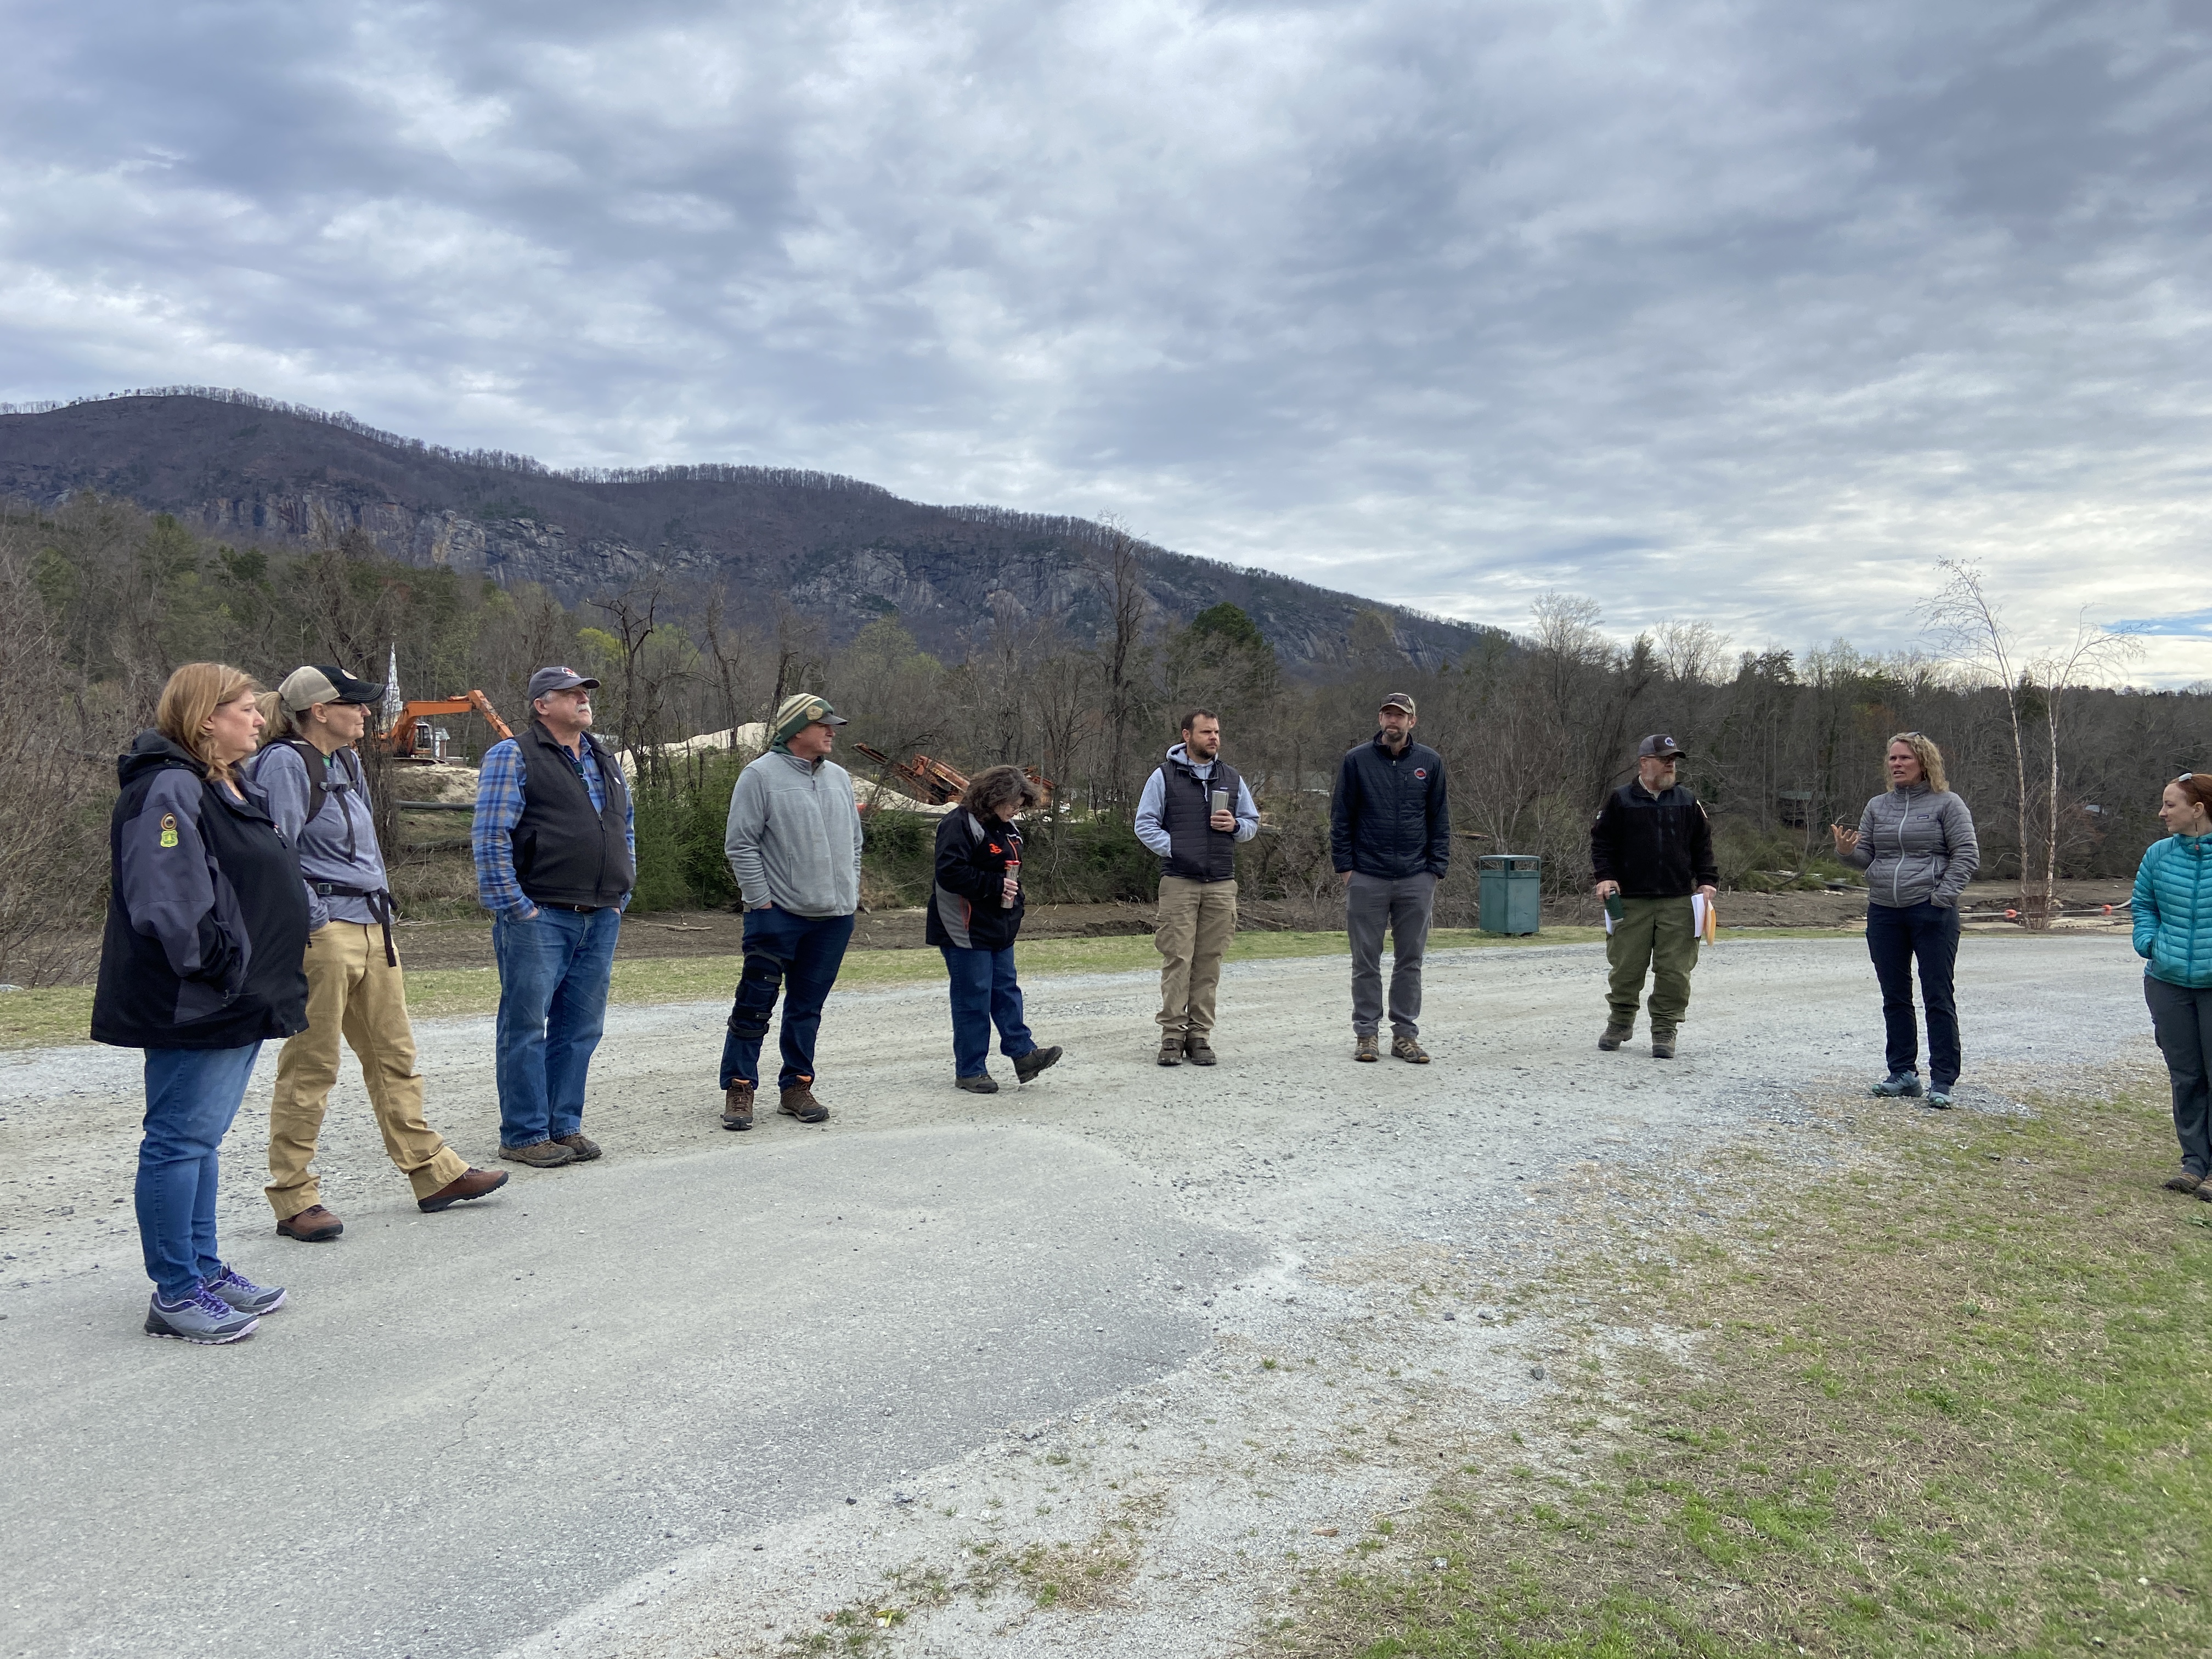 Natural resource professional people standing in a group outdoors with mountains in the background.